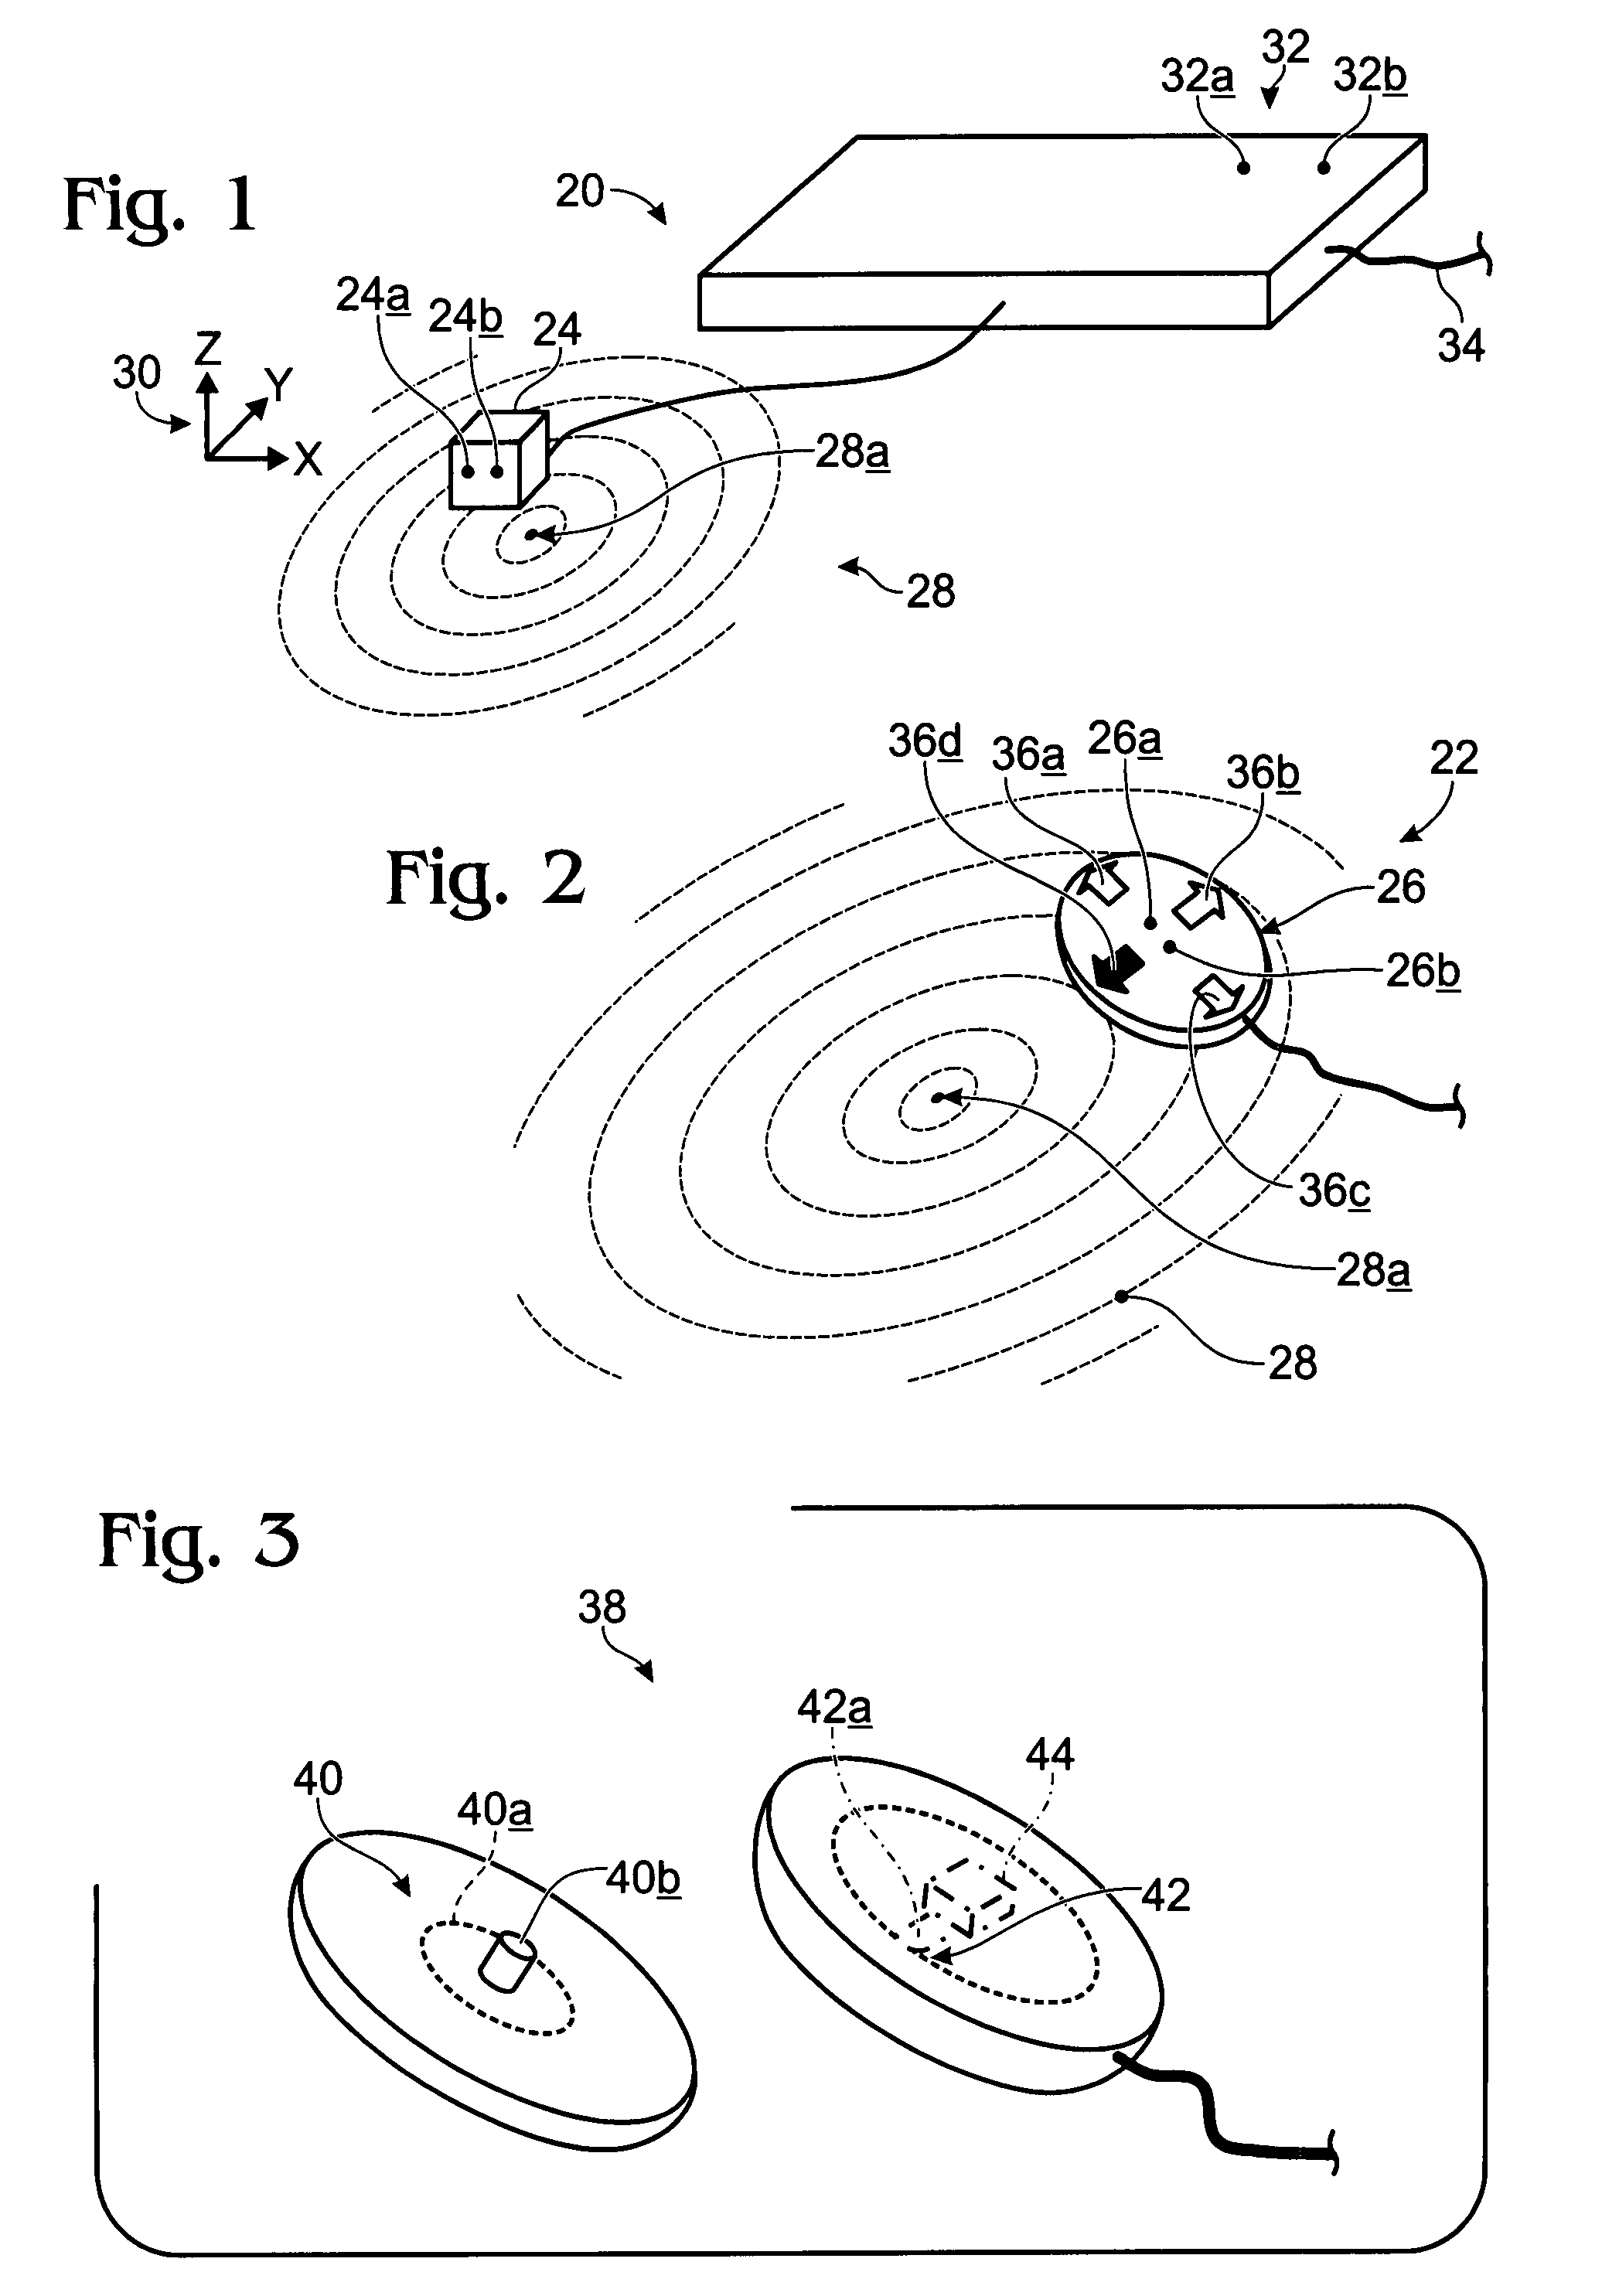 Heart-activity monitoring with multi-axial audio detection